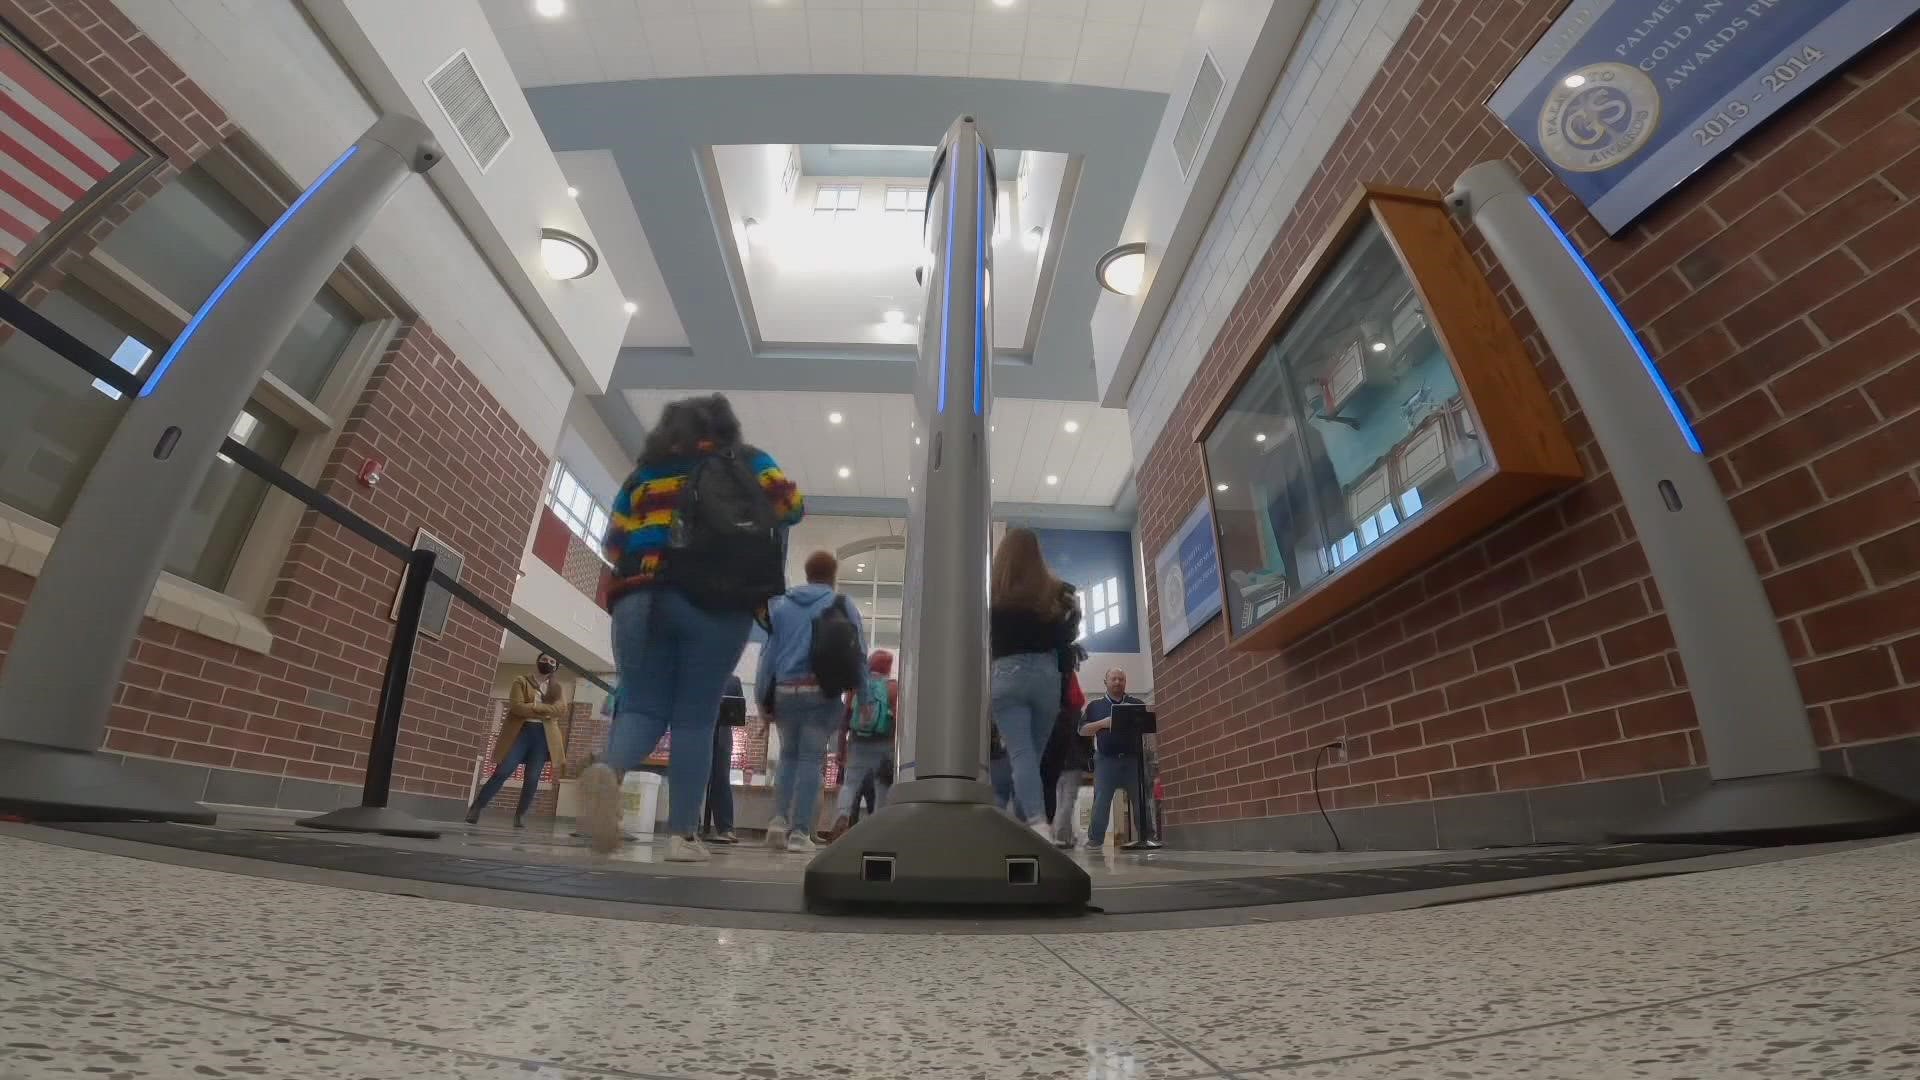 The district announced Thursday that it will be installing 43 body scanners in their 19 high schools.